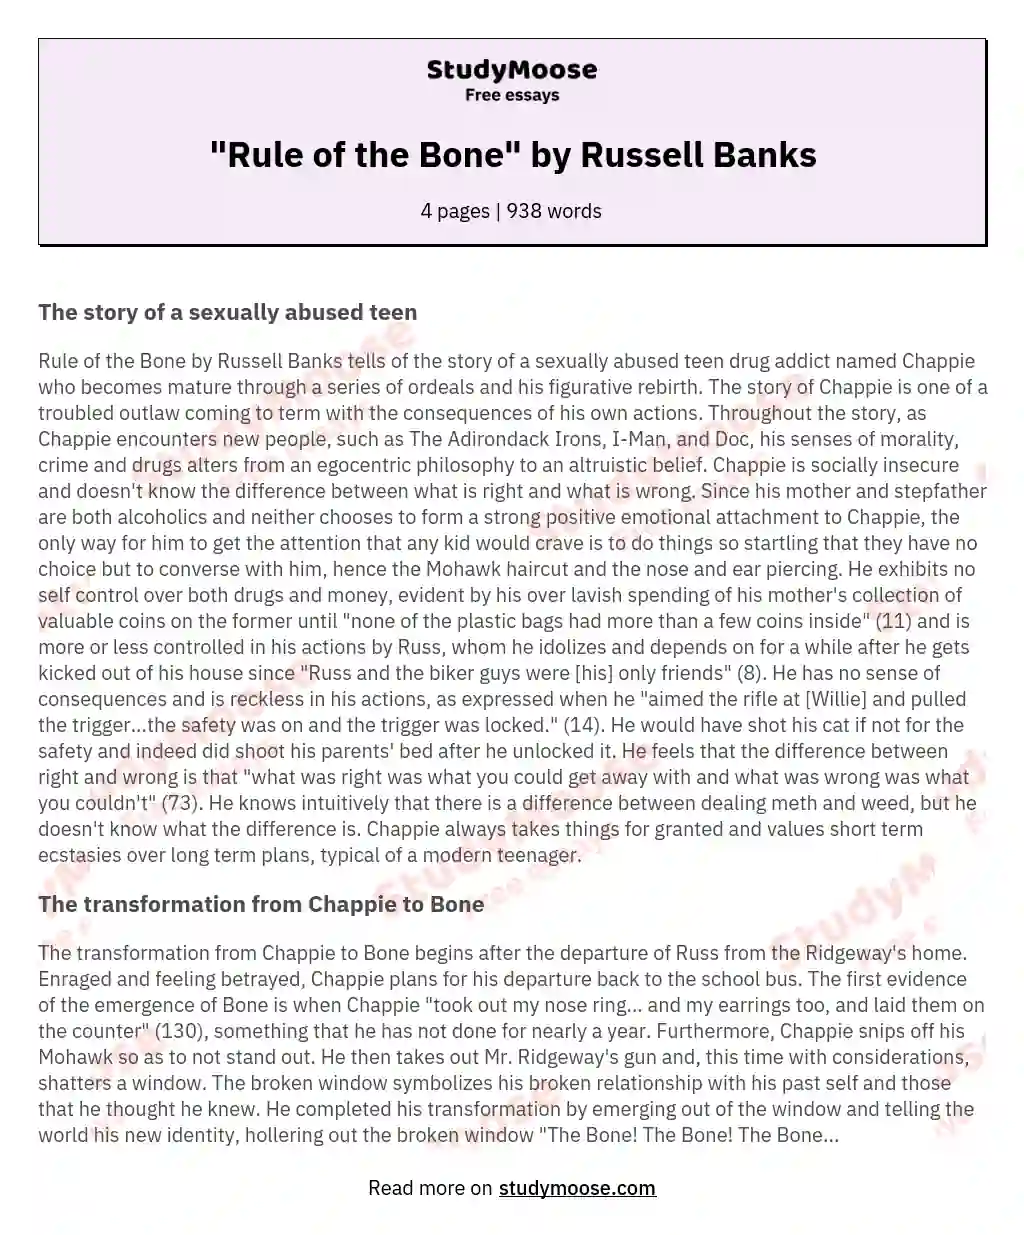 "Rule of the Bone" by Russell Banks essay